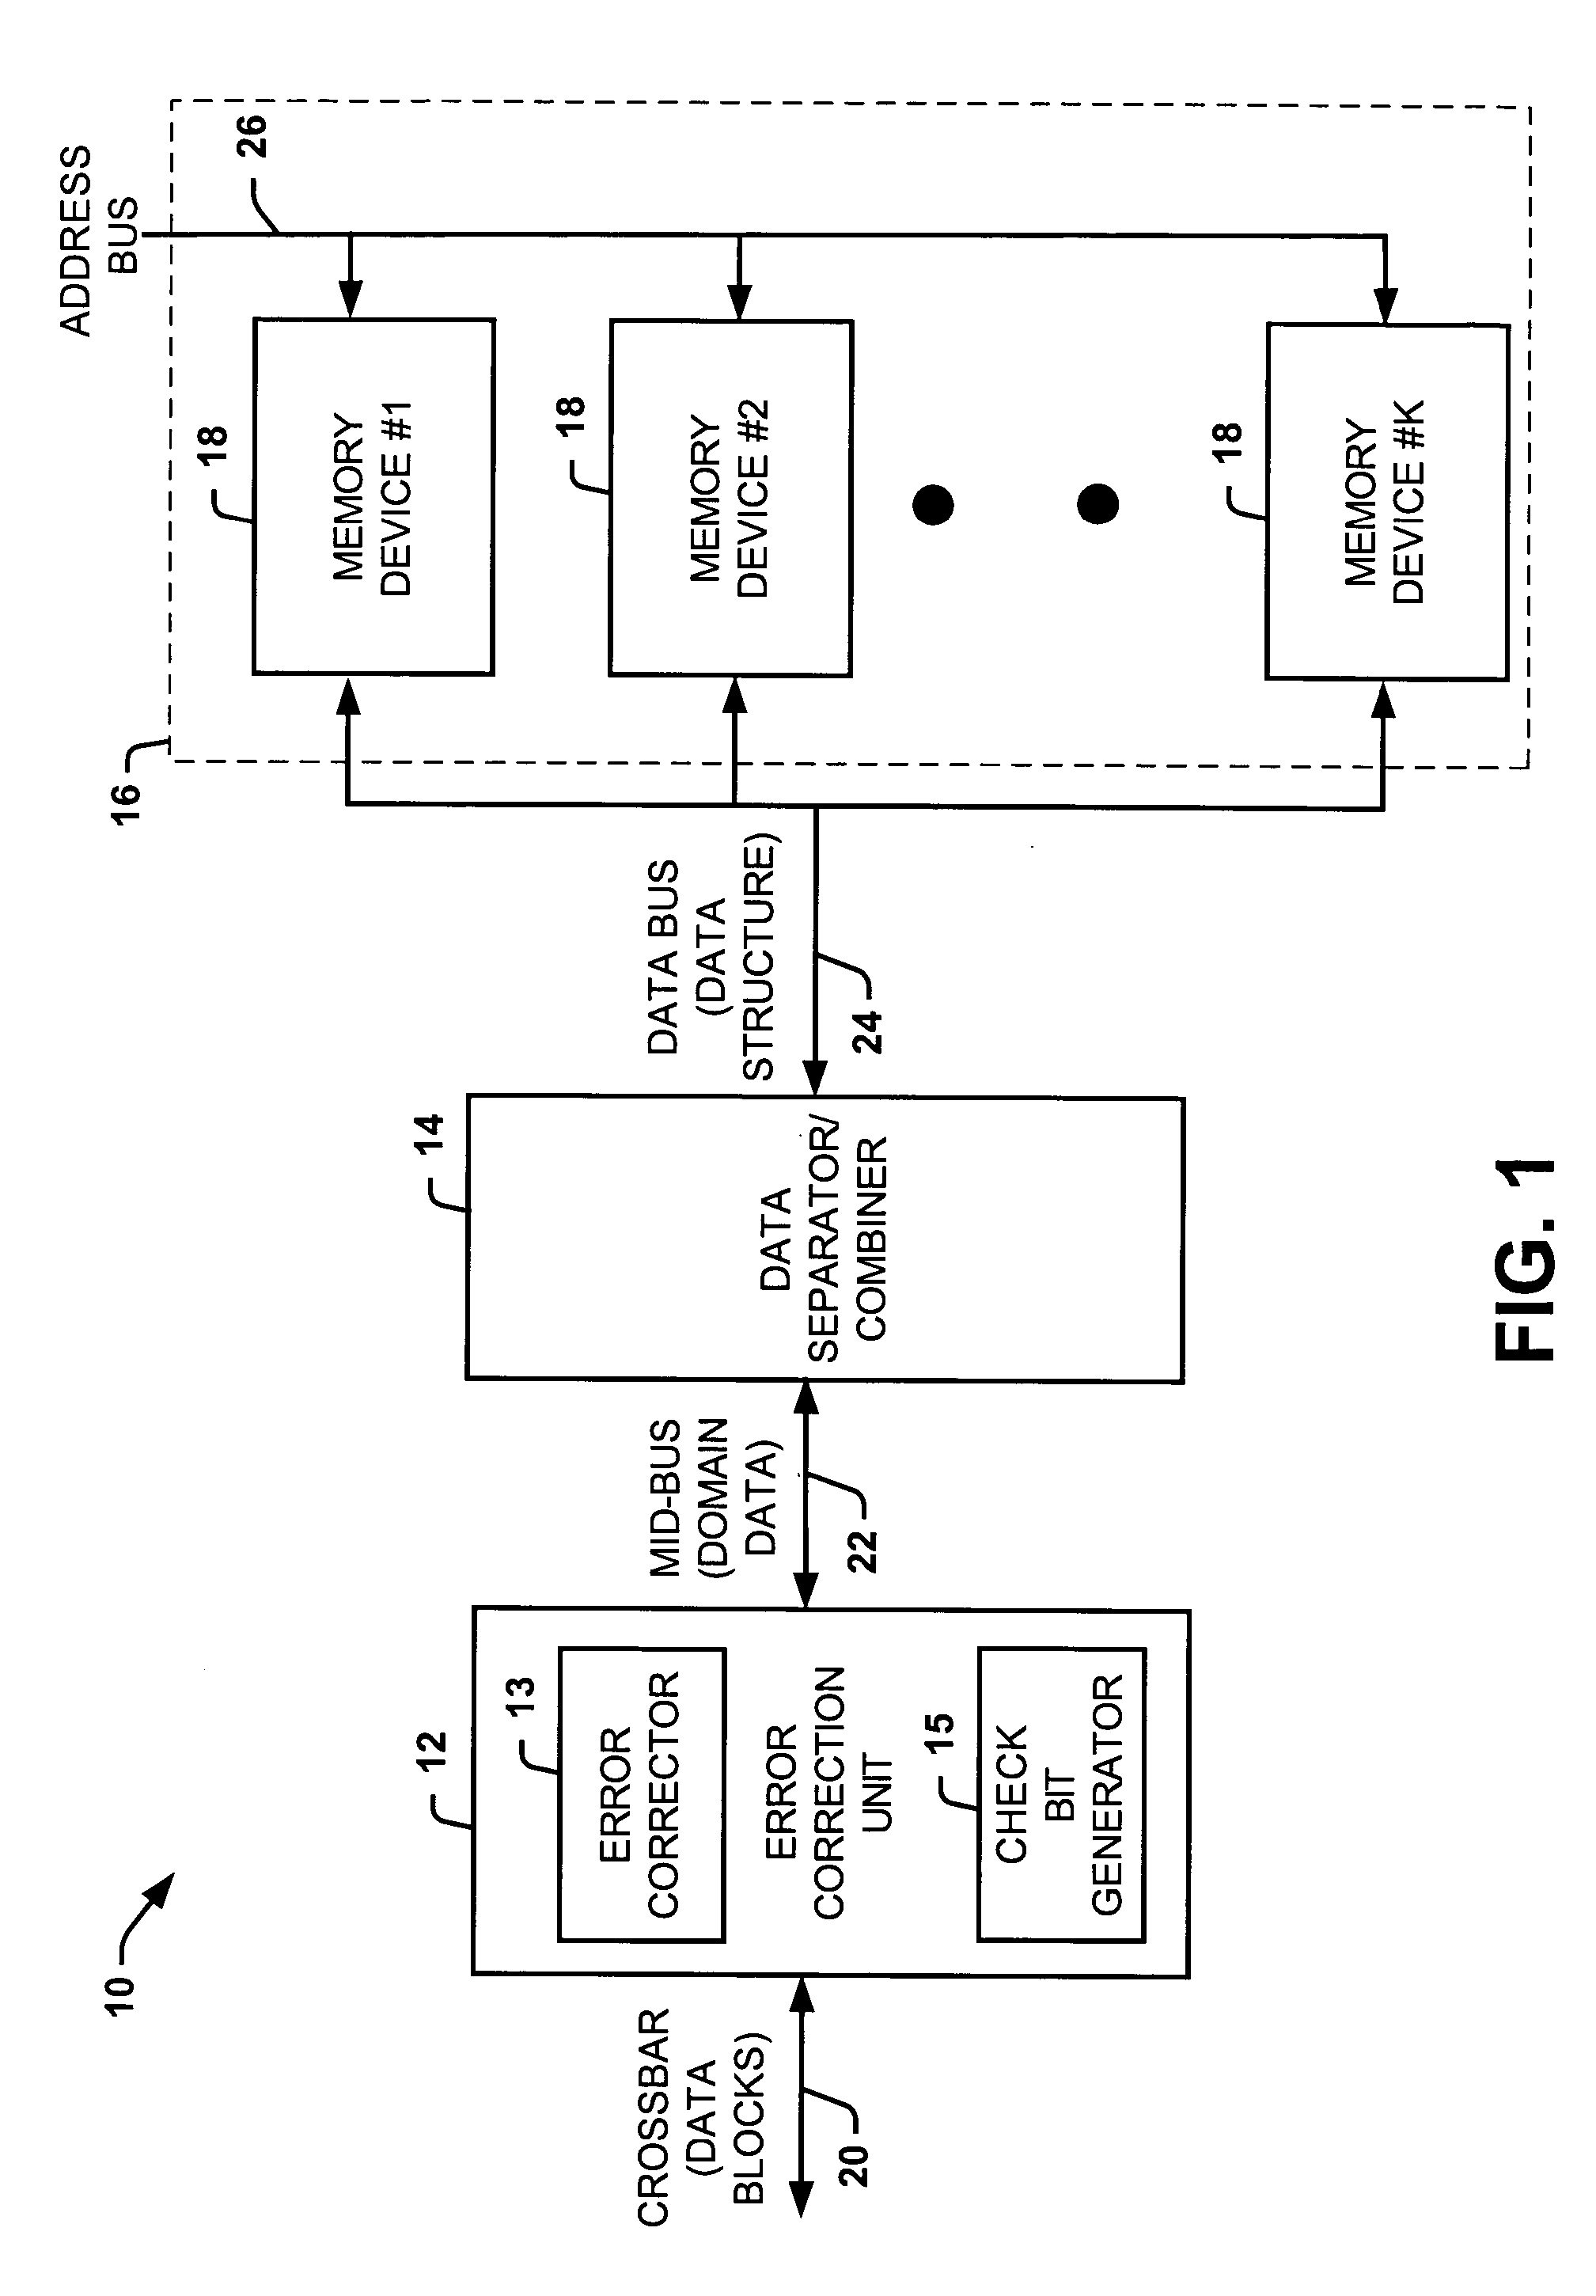 Systems and methods of partitioning data to facilitate error correction